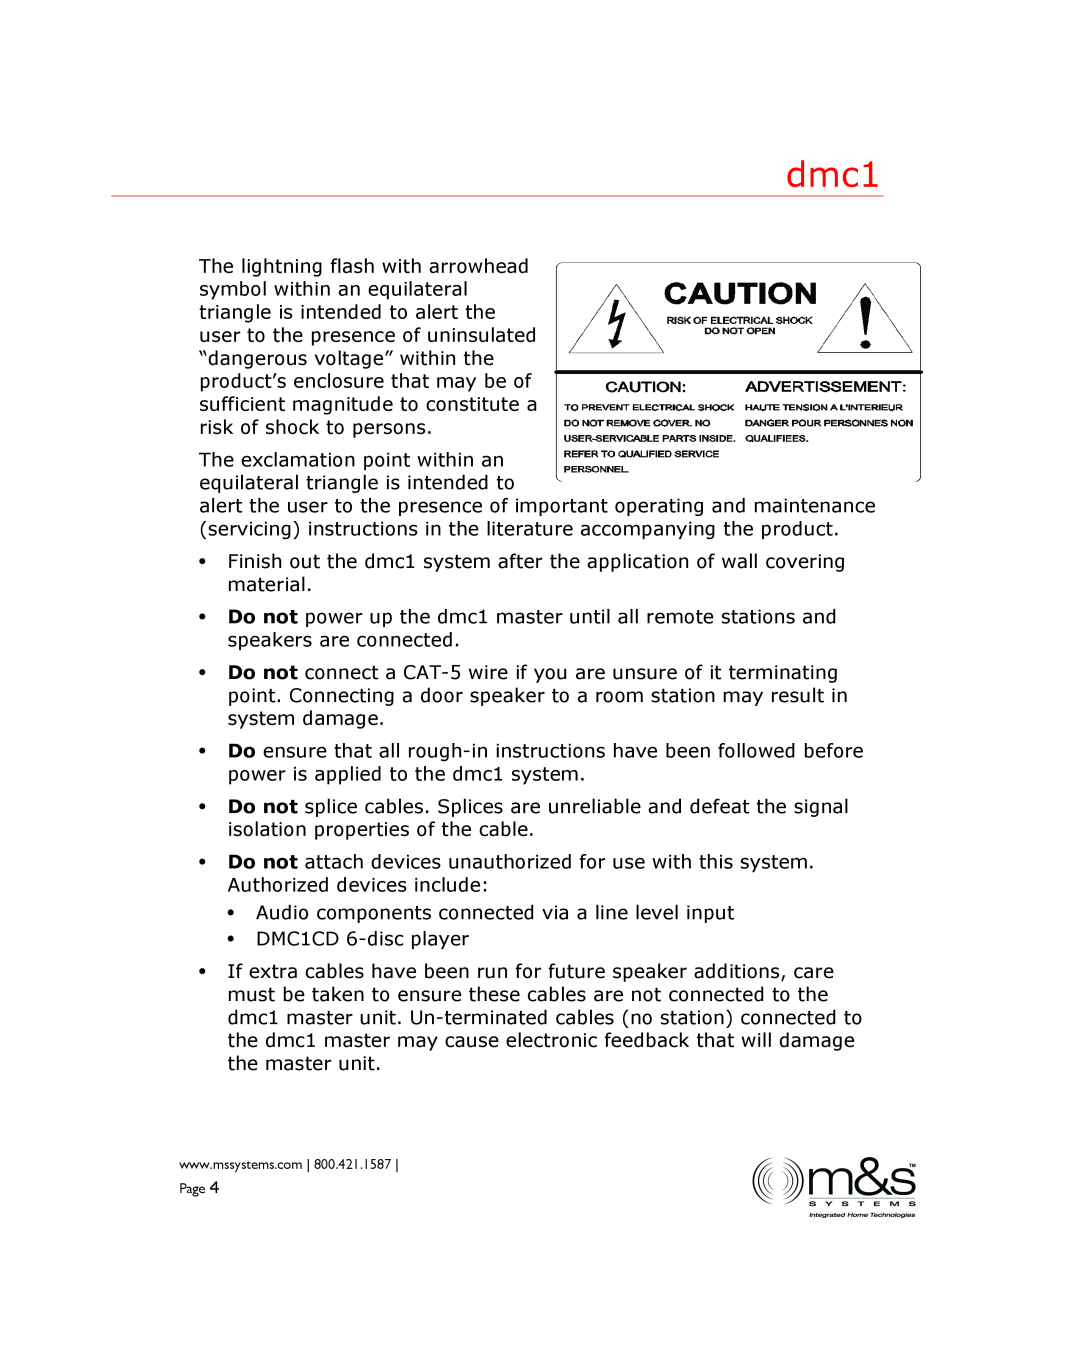 M&S Systems dmc1 manual Audio components connected via a line level input 